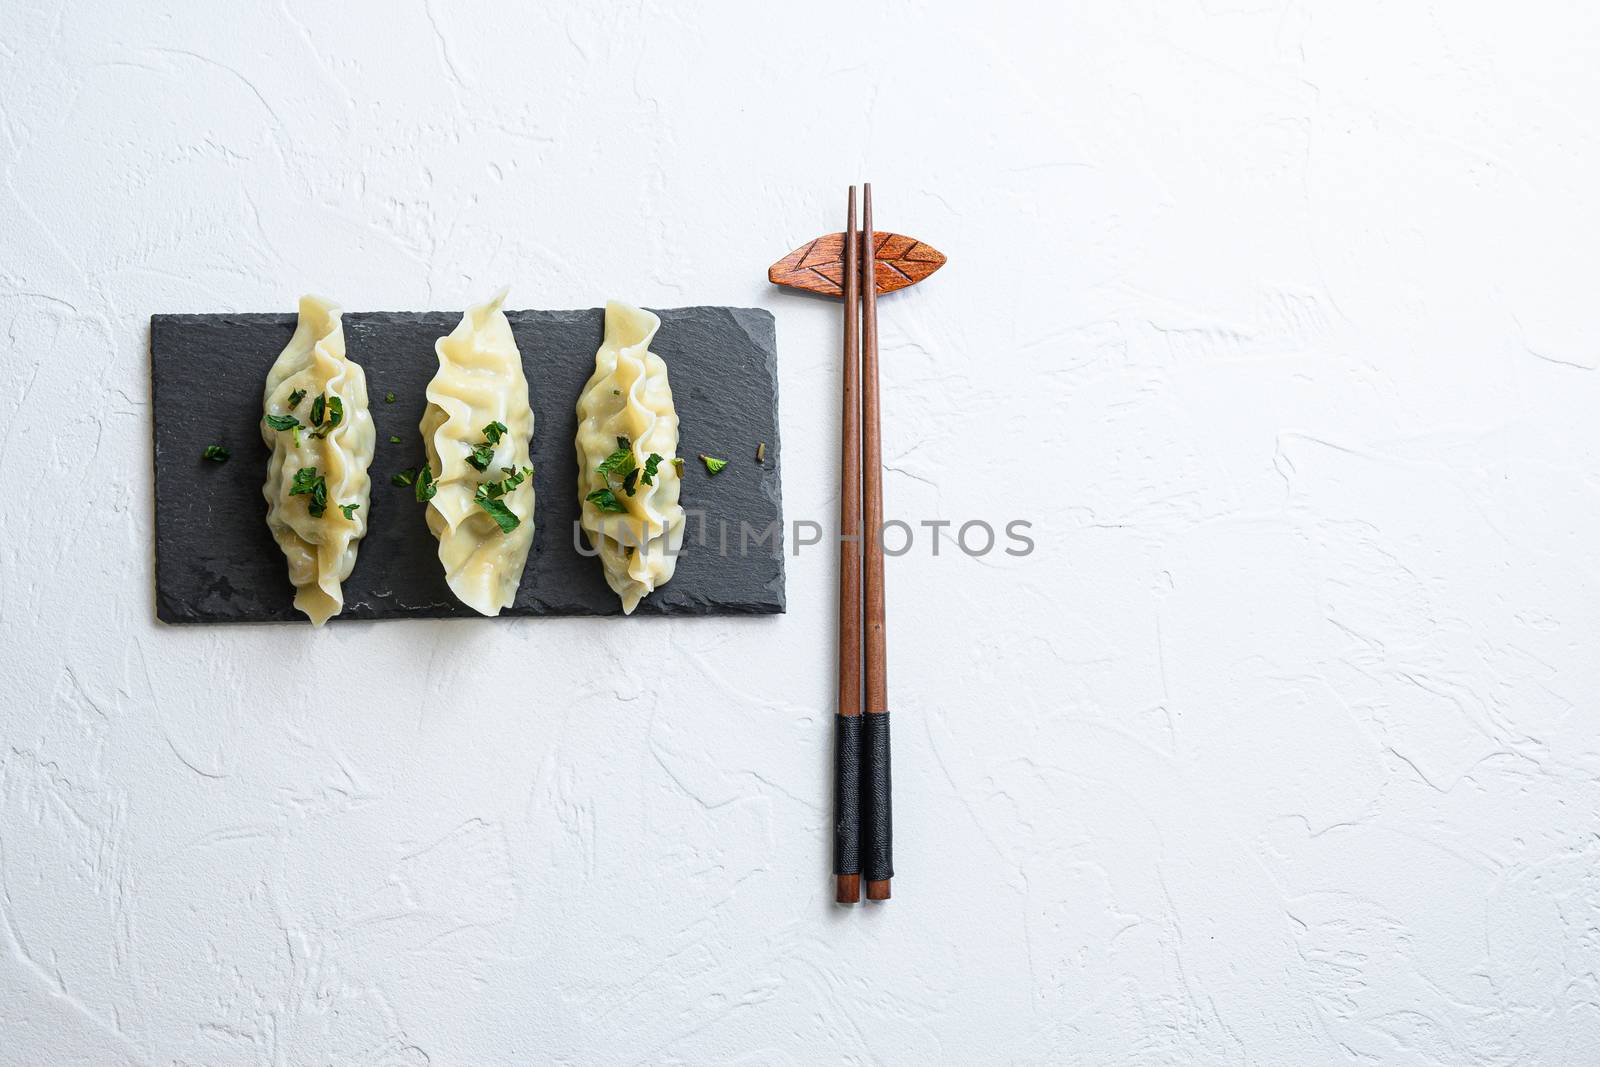 Kimchi dumplings meat dumplings on black stone plate over white textured background top view space for text nobody by Ilianesolenyi